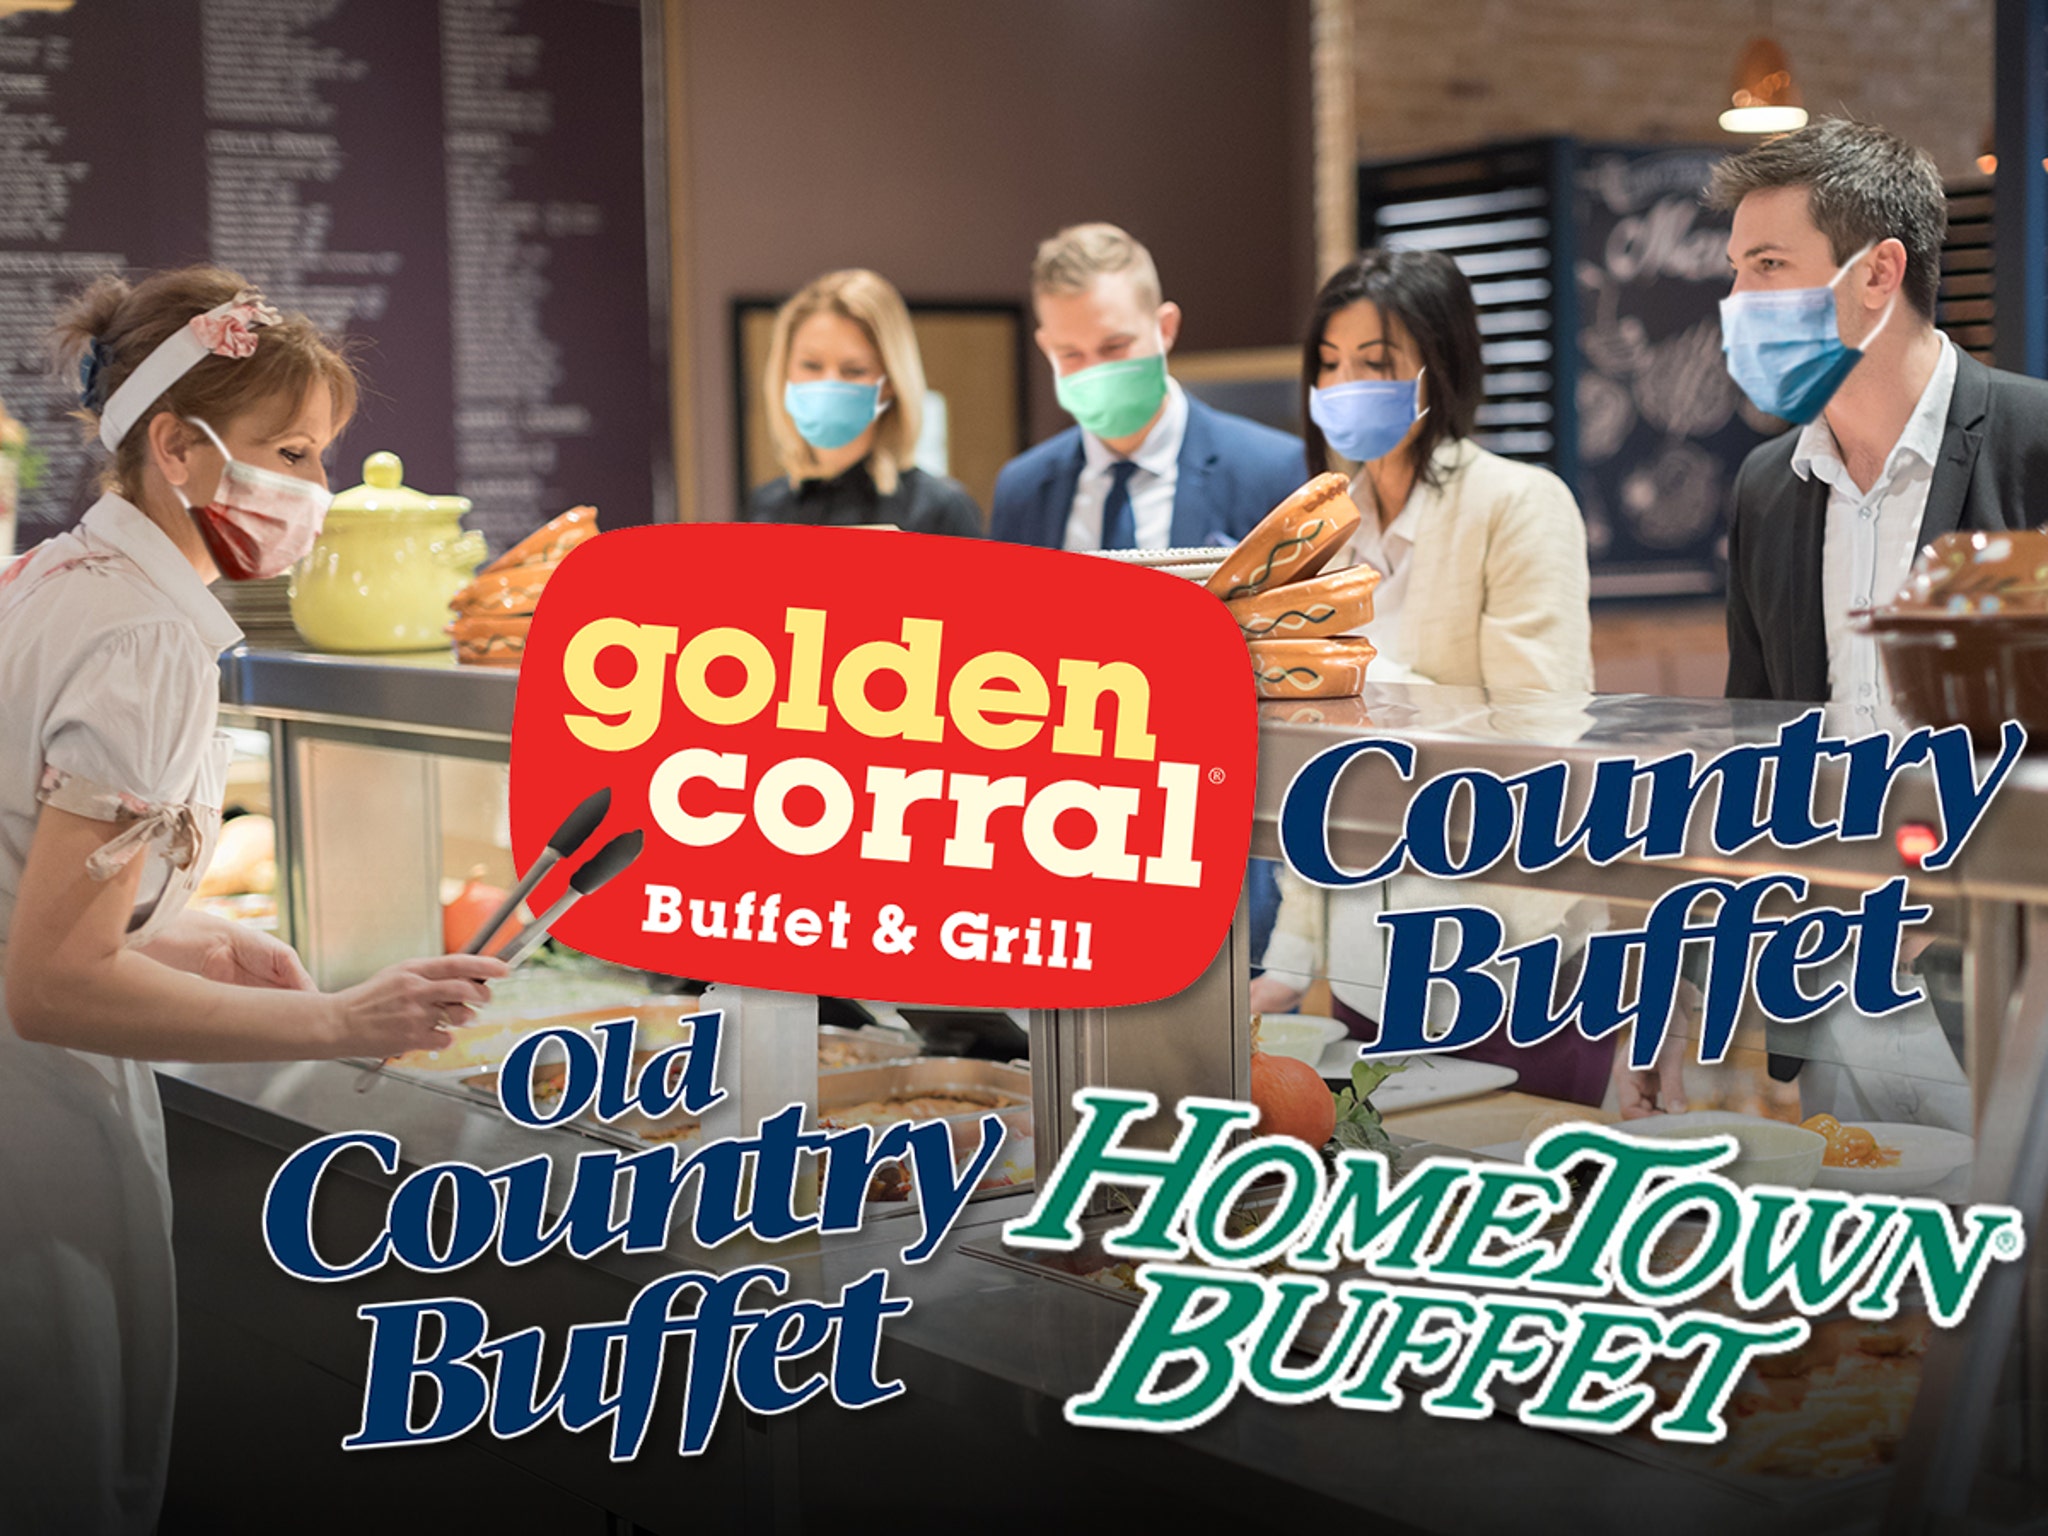 Golden Corral Buffet & Grill - We are looking for new people to